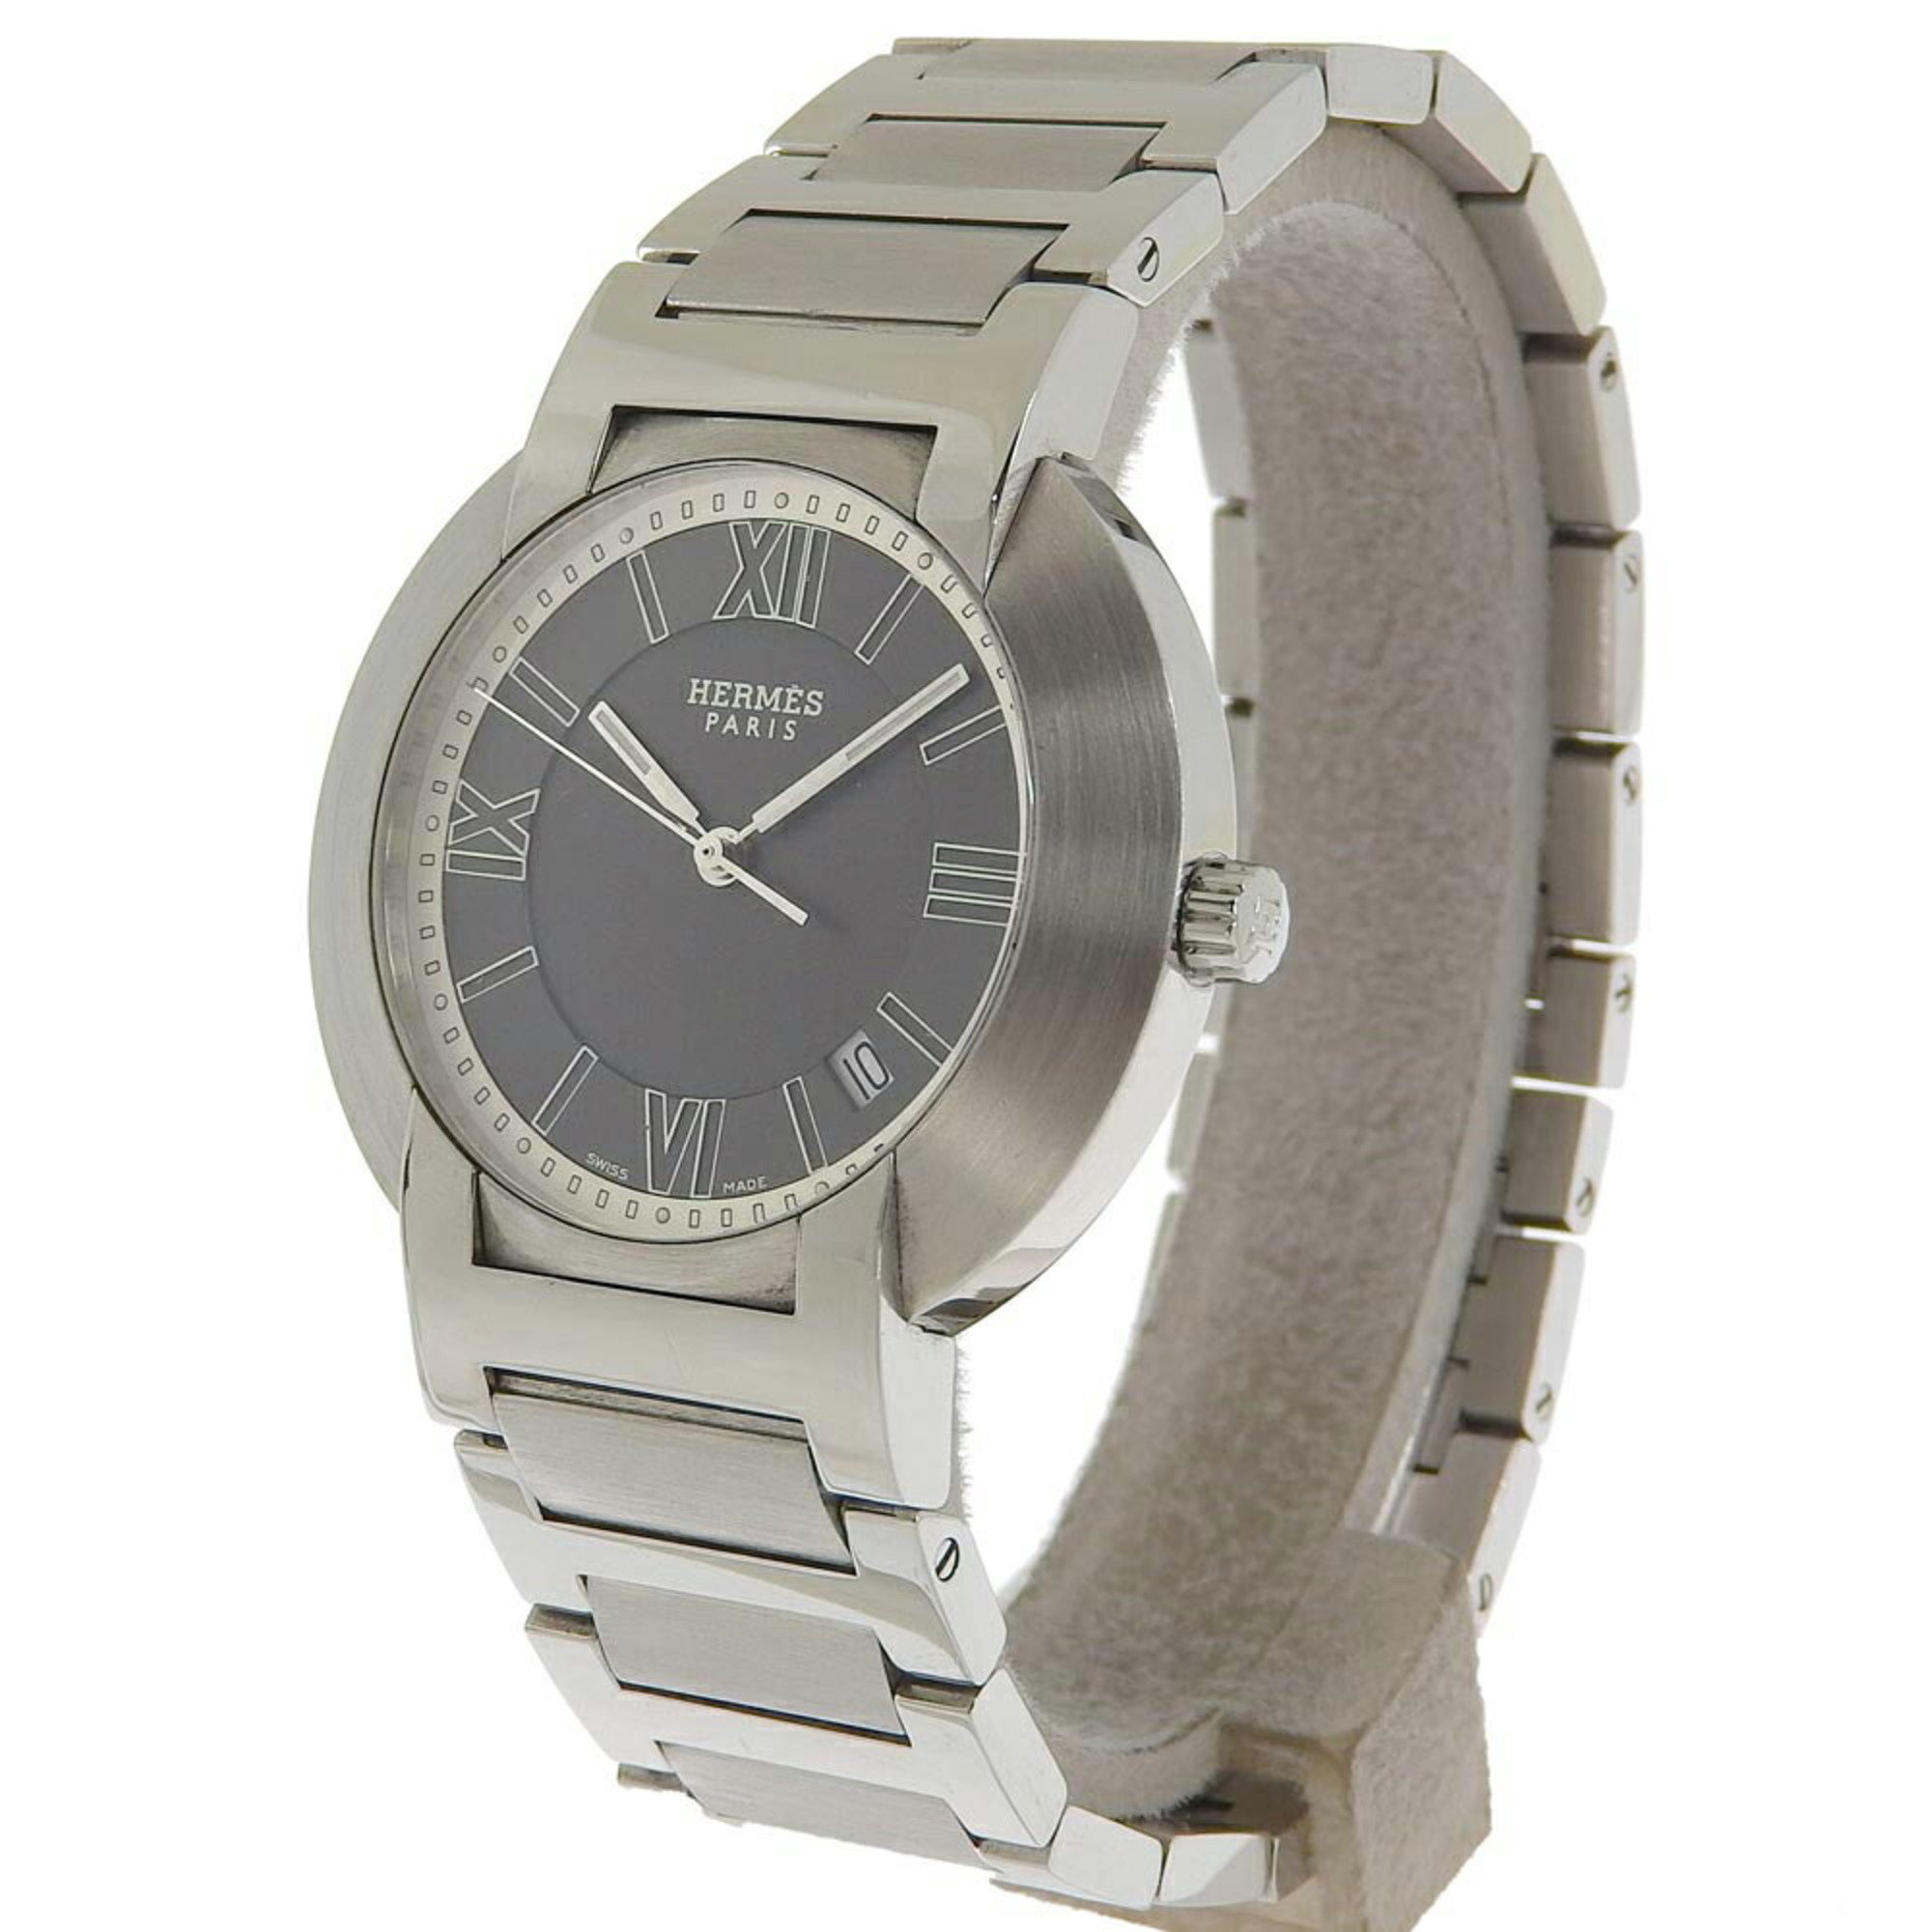 Hermes Nomad Watch No1.810 Stainless Steel Auto Quartz Analog Display Grey Dial Men's